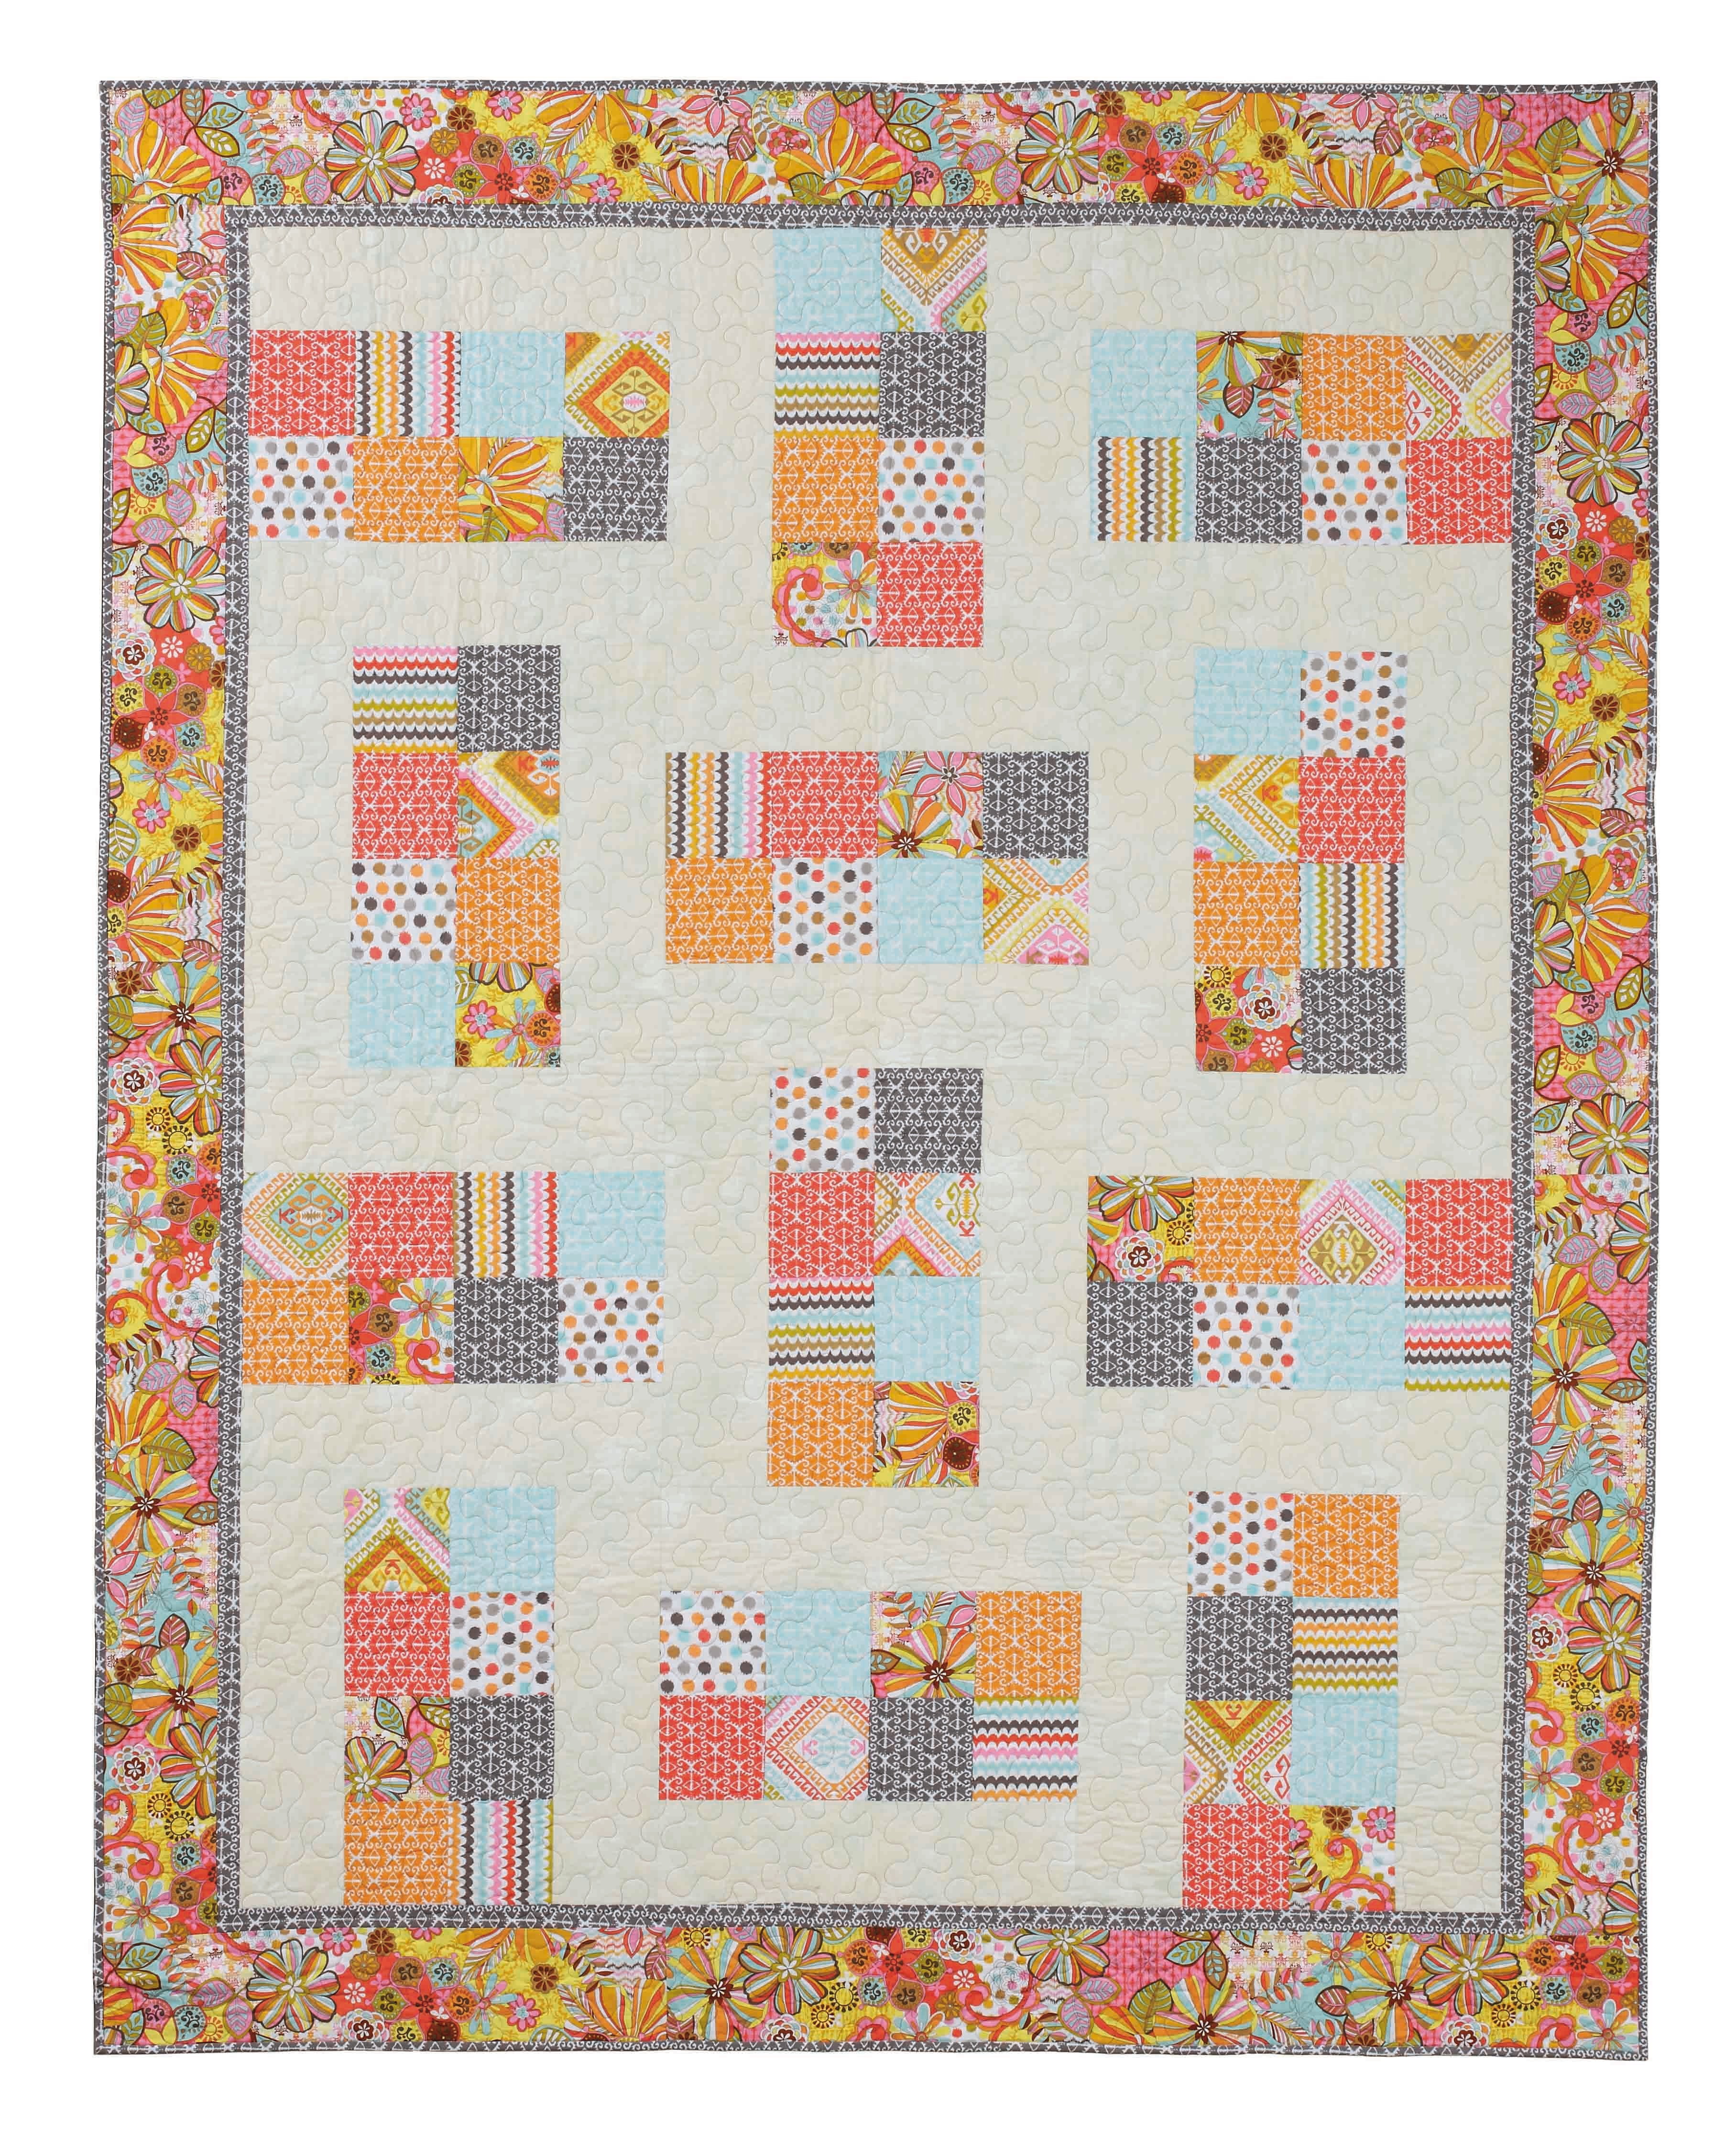 ePattern Quilting Nine-Patch Wall Hanging - Leisure Arts